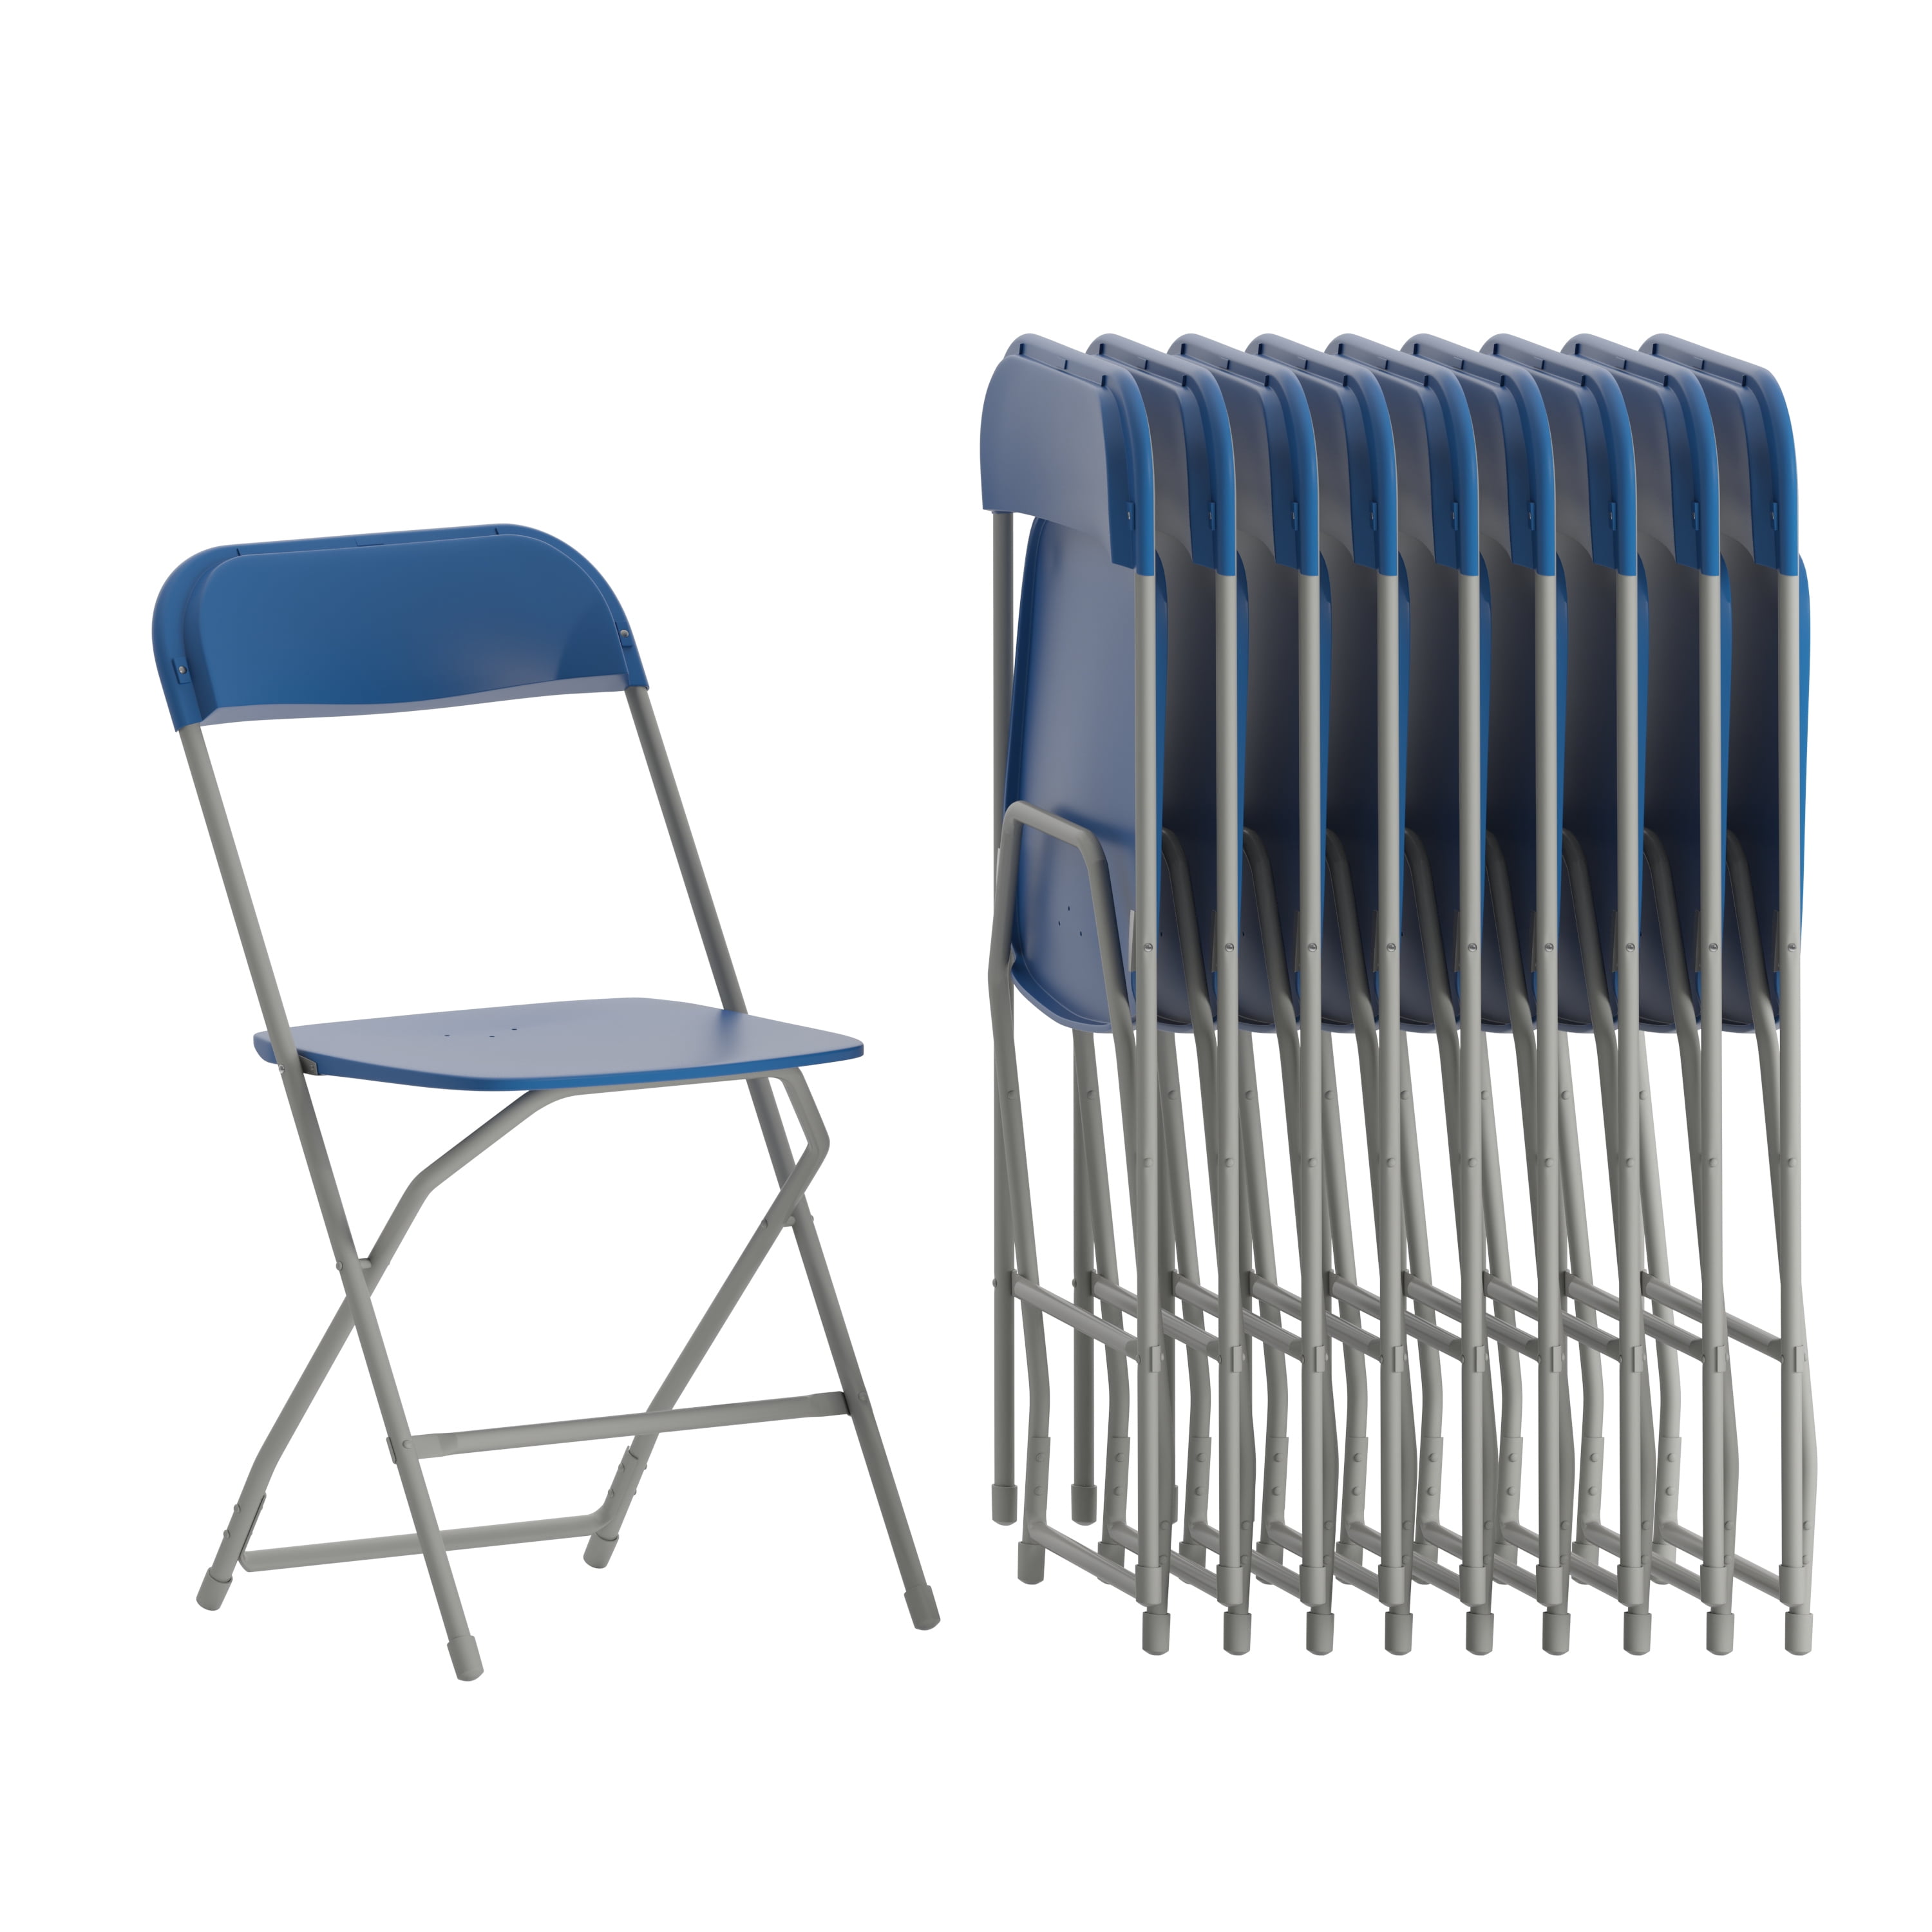 Emma + Oliver Set of 10 Blue Stackable Folding Plastic Chairs - 650 LB  Weight Capacity